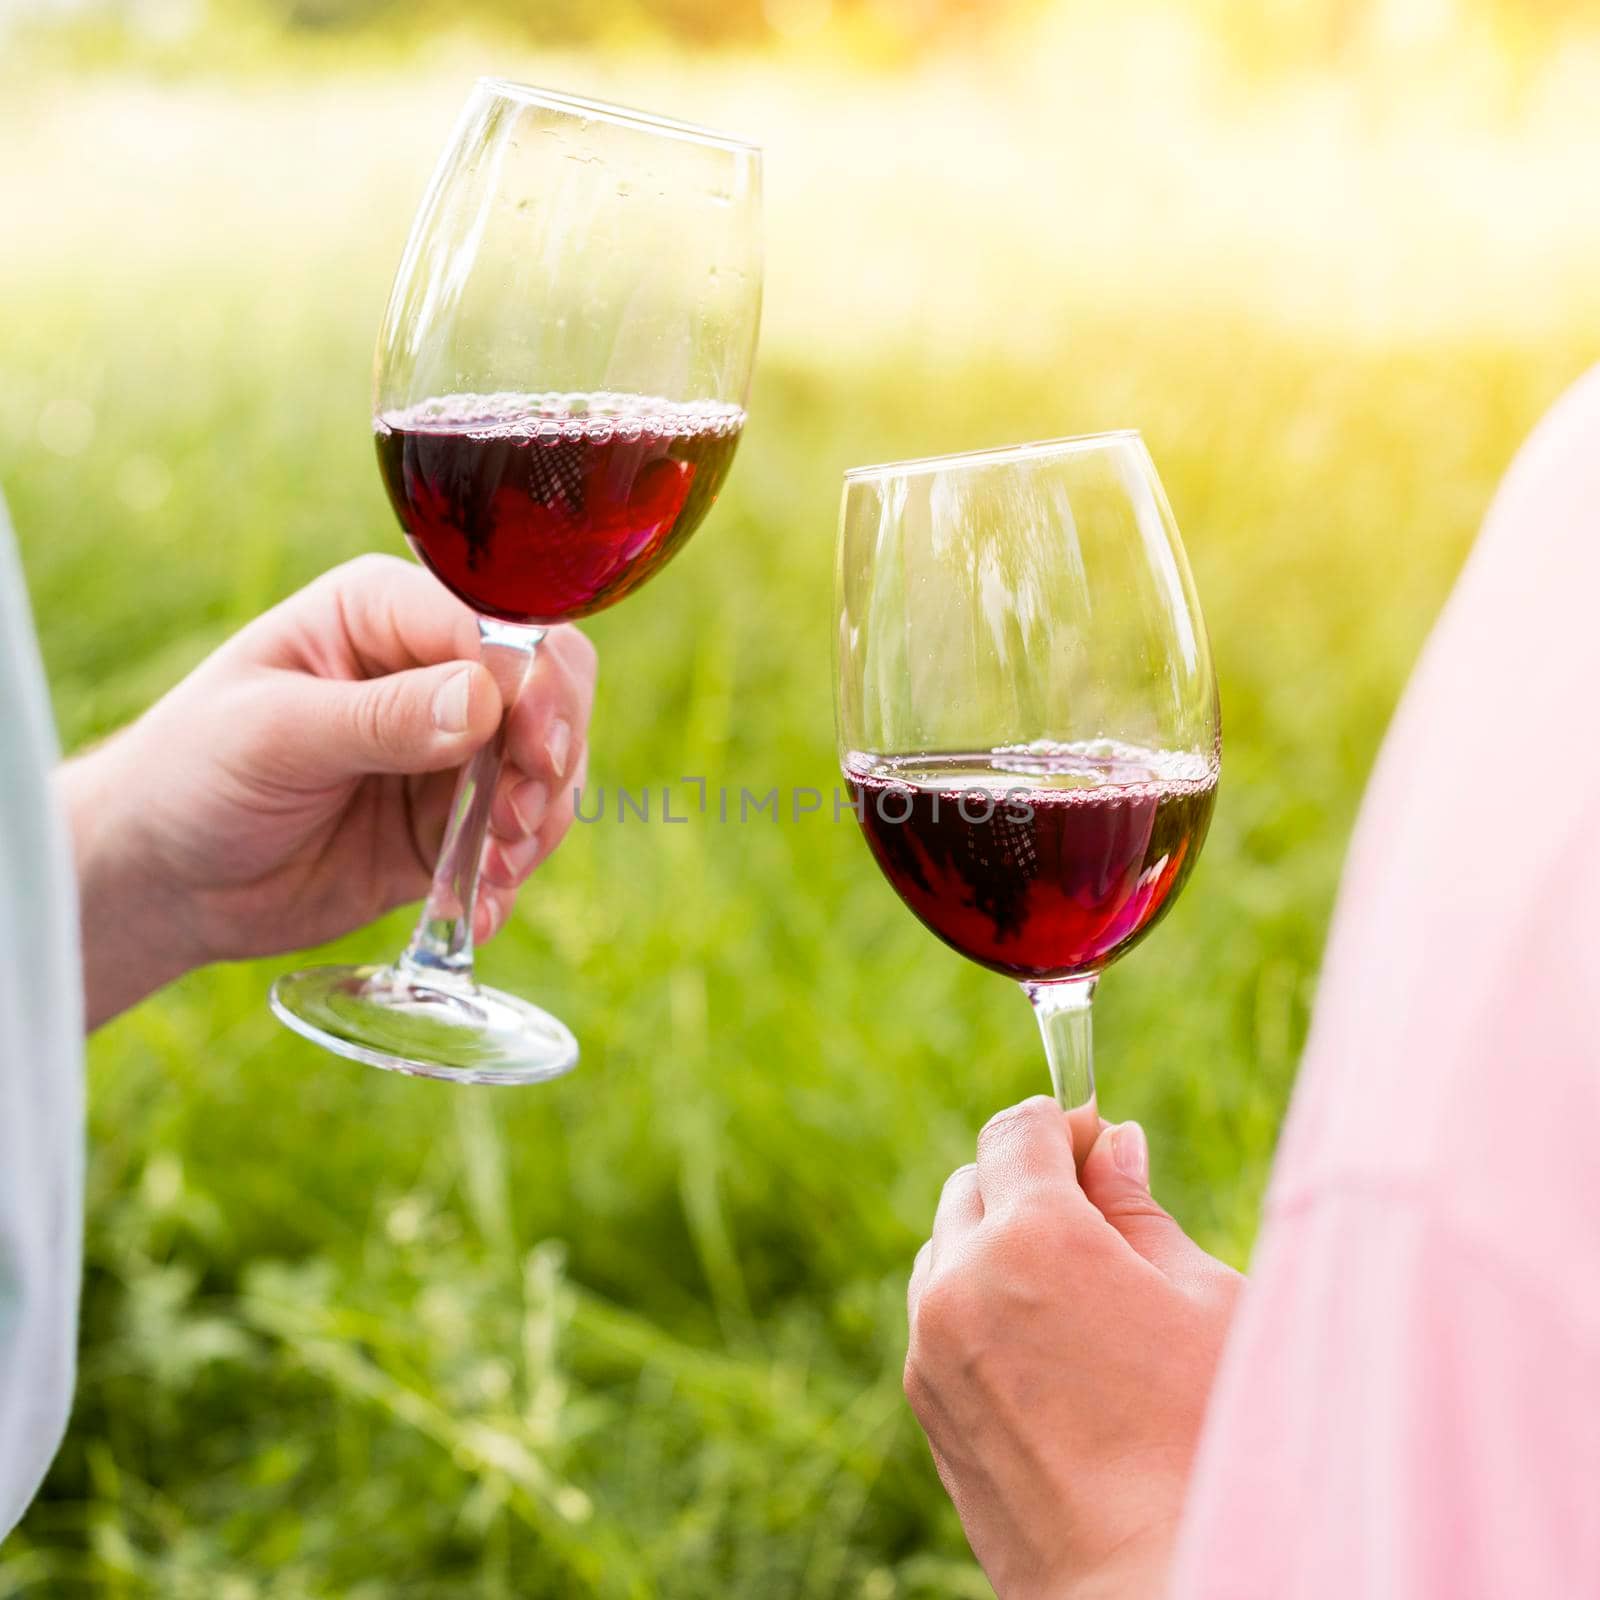 wineglasses with red wine hands couple picnic. High quality photo by Zahard